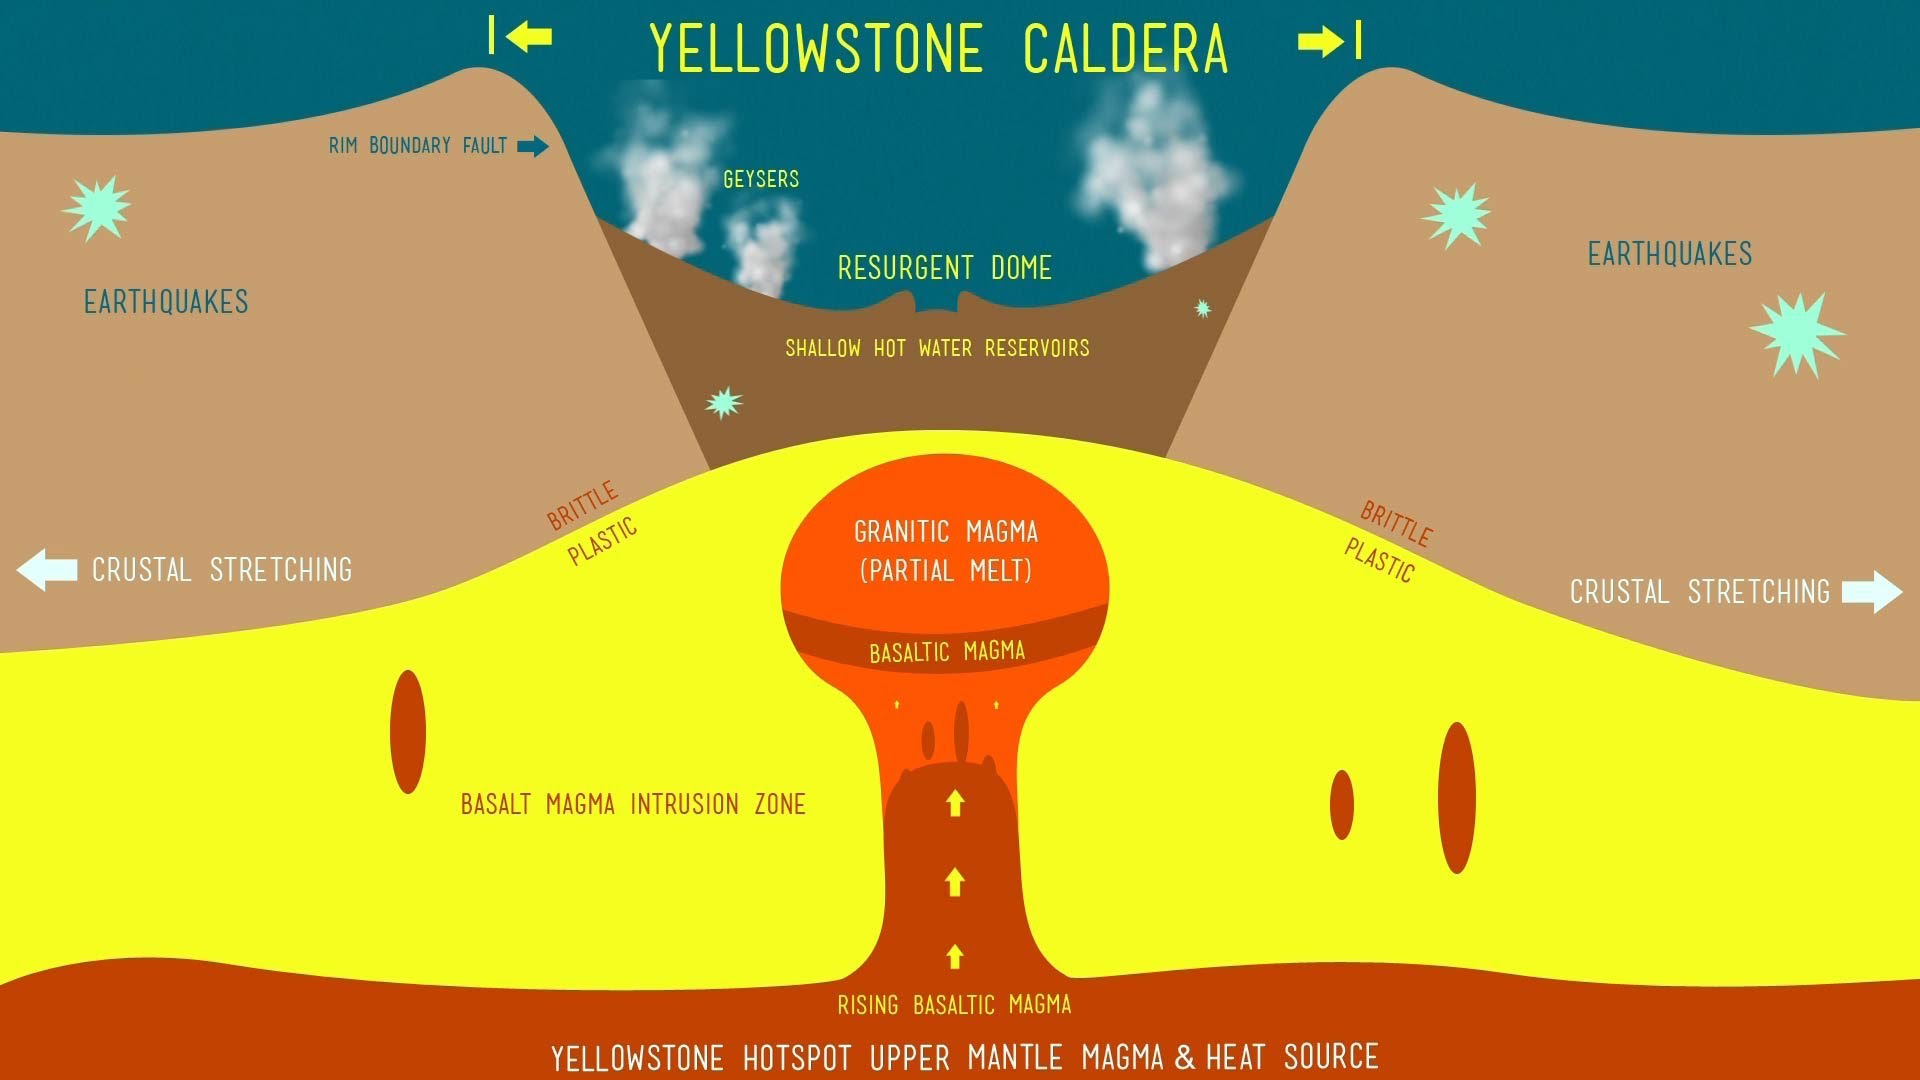 Yellowstone supervolcano can generate electricity if NASA cools it before eruption